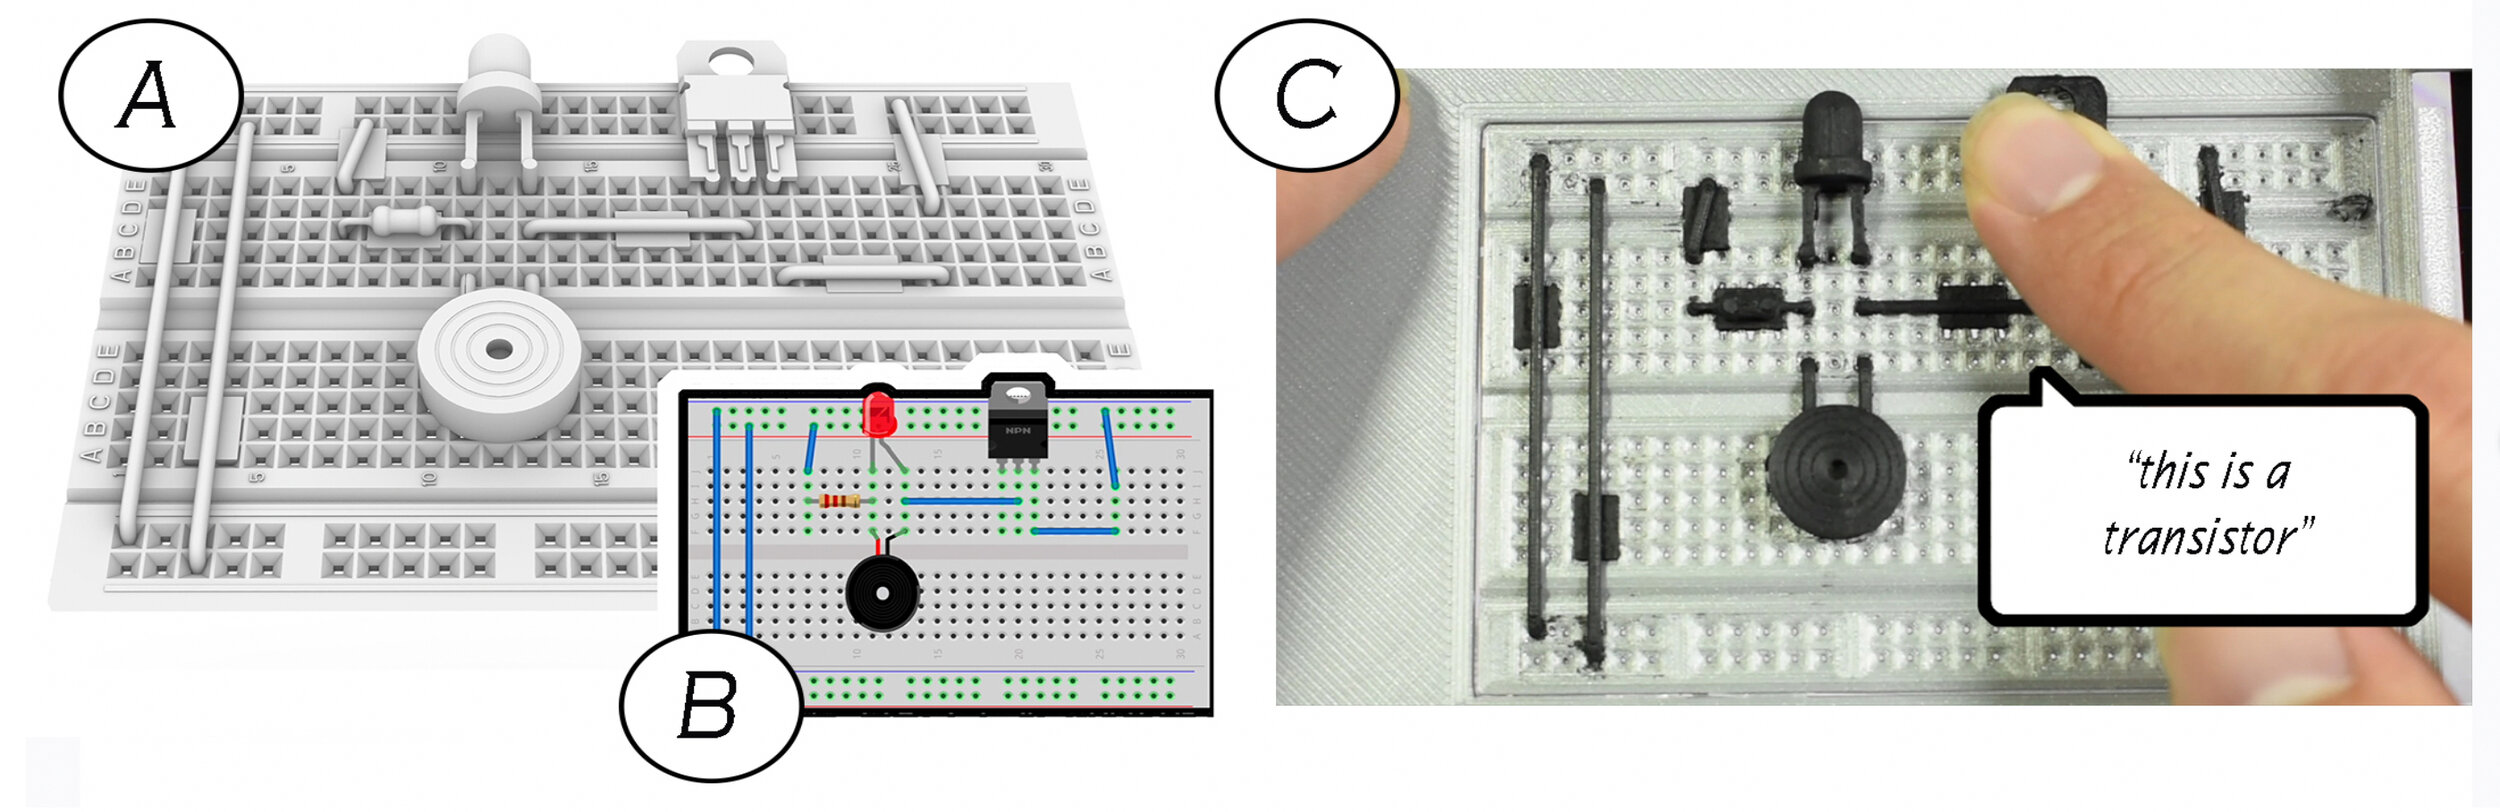  System overview labeled A to C. A: 3D rendering of a circuit board. B: Circuit diagram. C: Photo of a 3D printed circuit board with an illustration of audio feedback saying “this is a transistor”. 